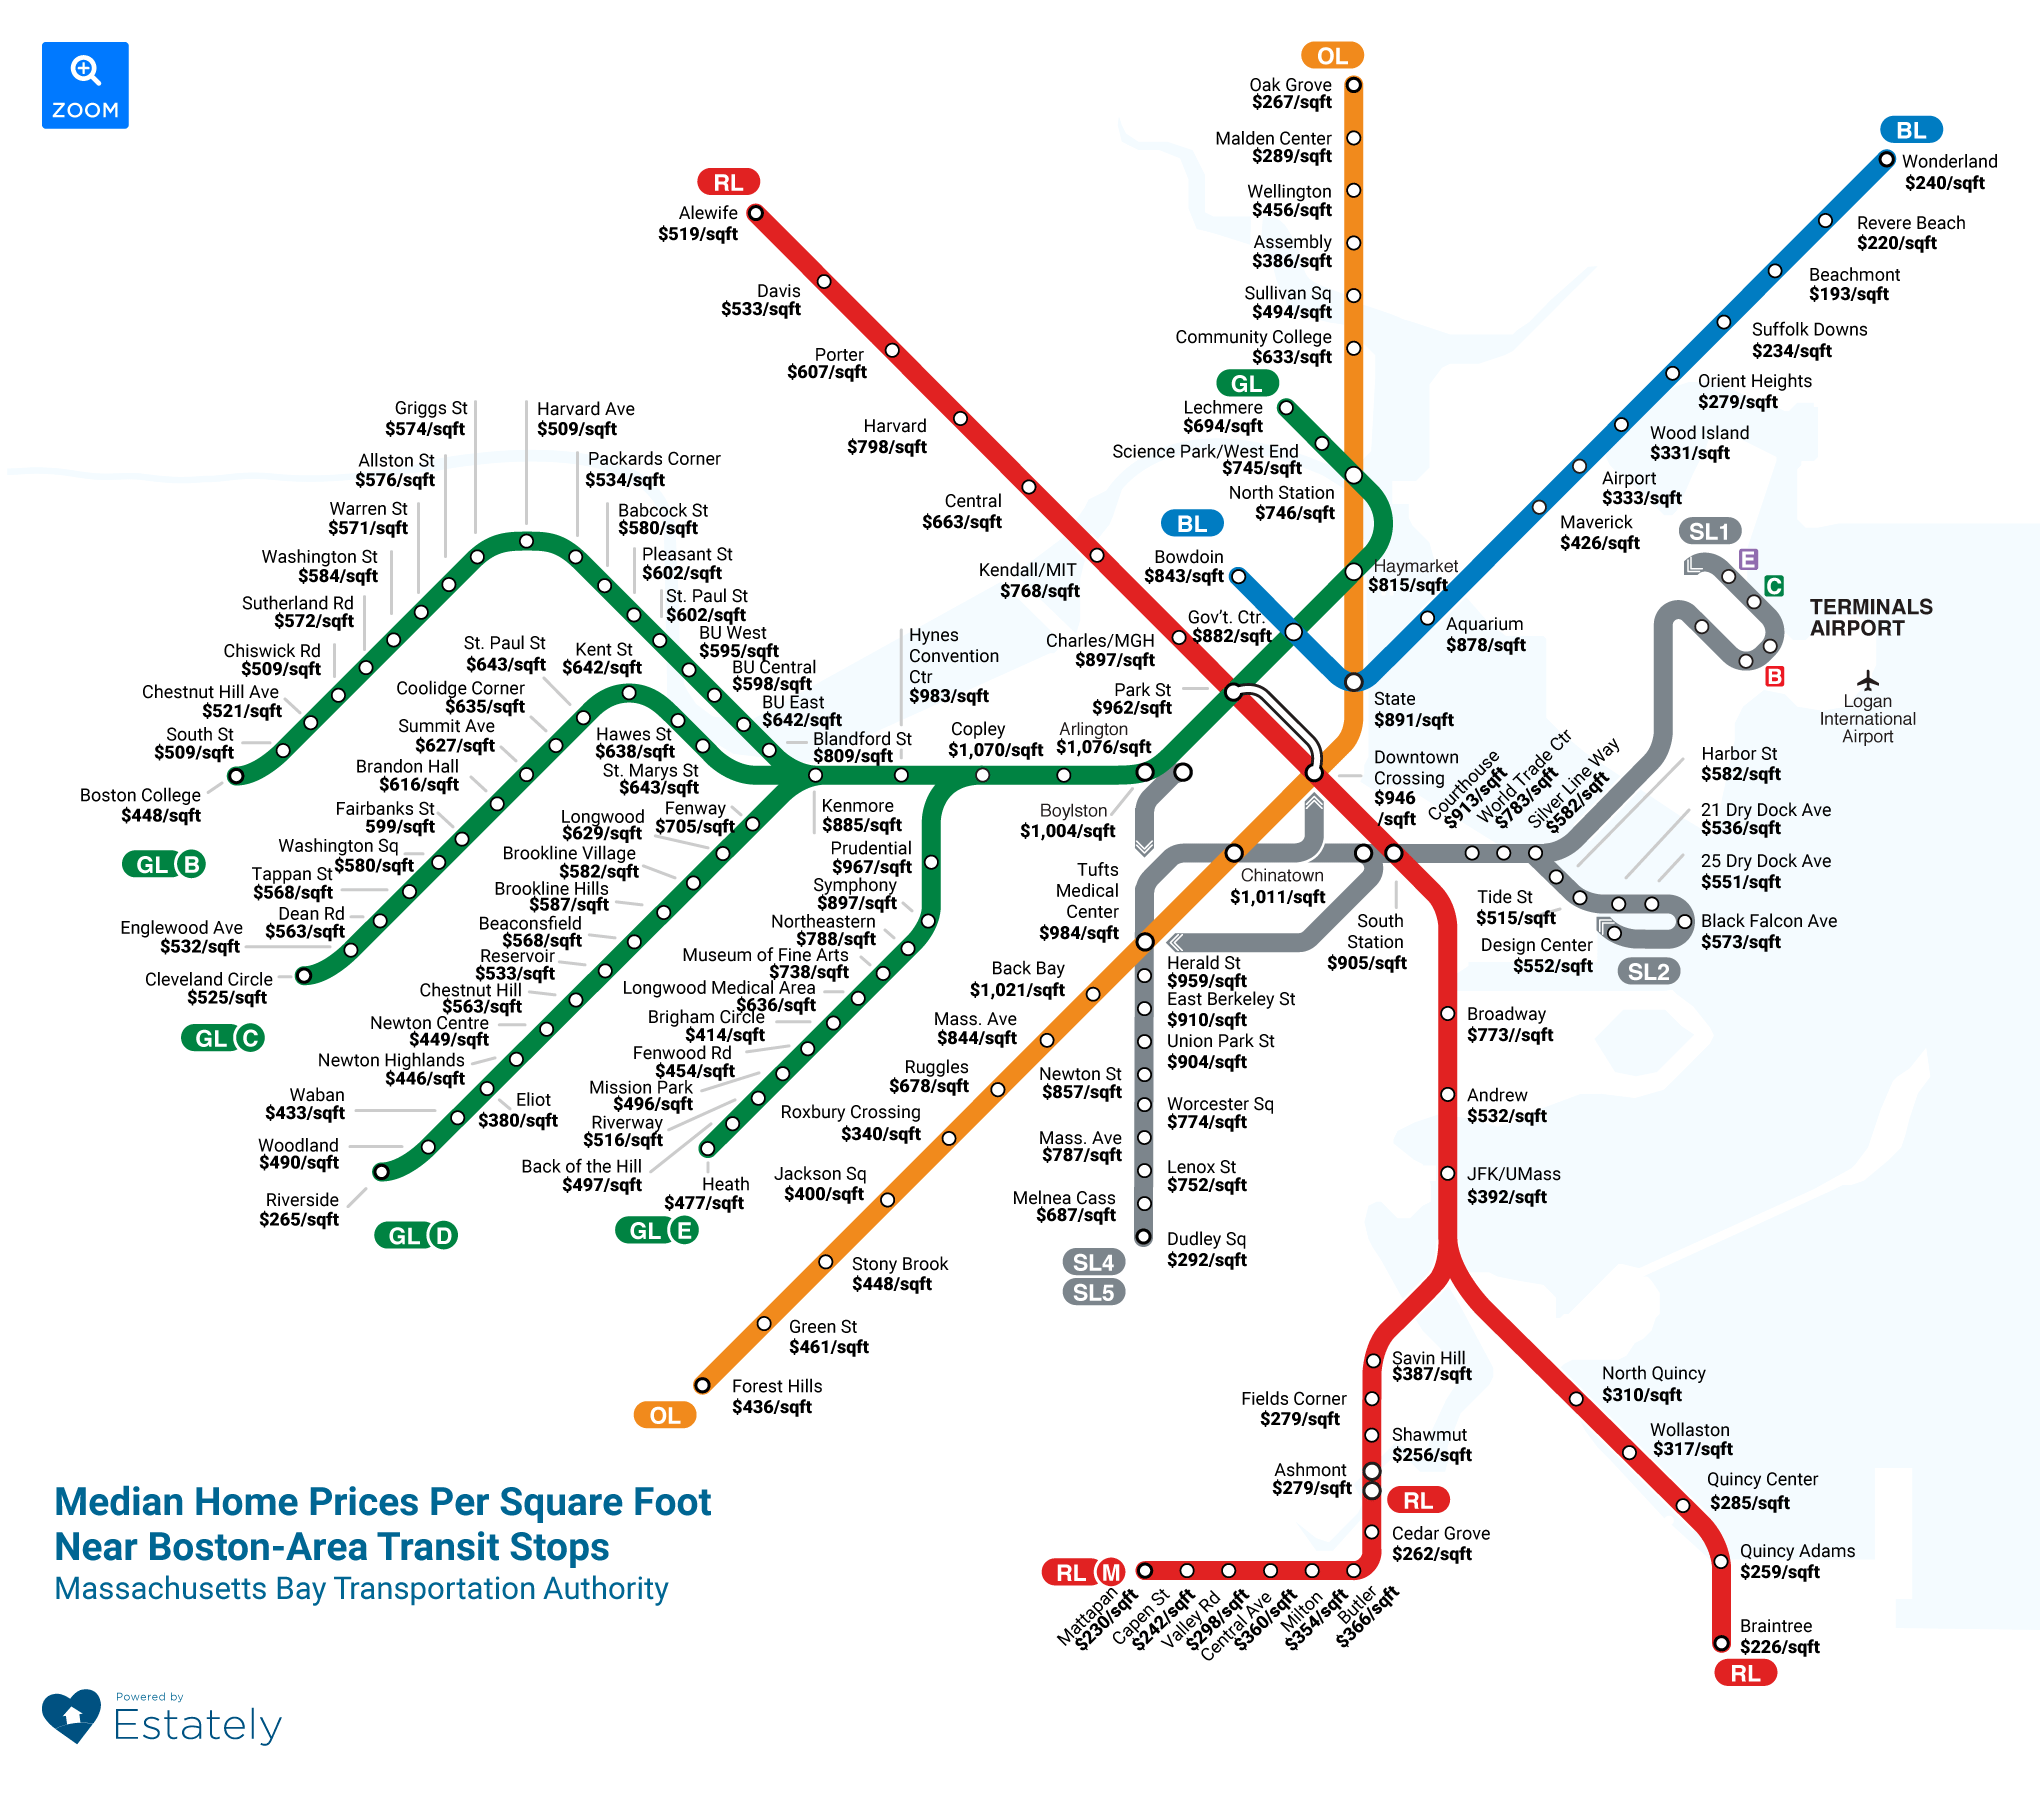 Boston Area Home Prices by Transit Stop